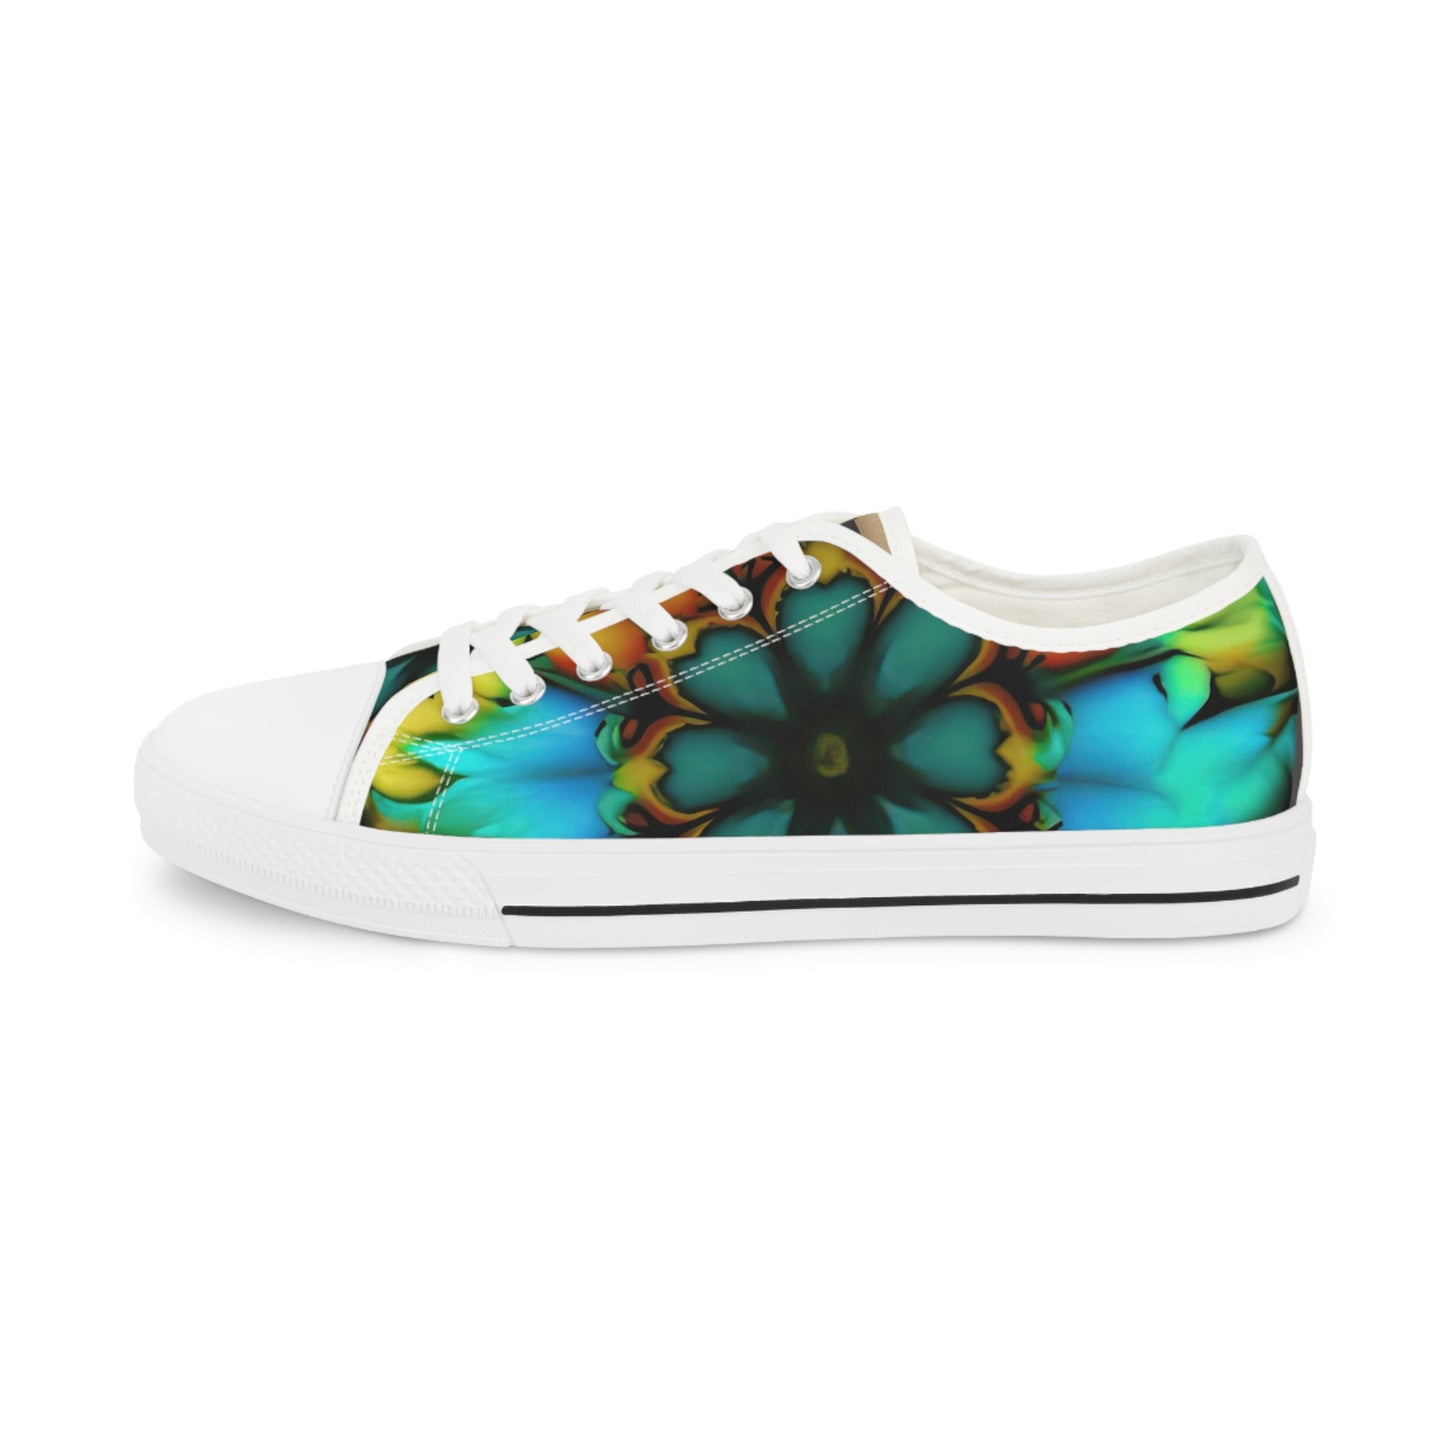 Bold And Beautiful Tie Dye B 3 Blue Yellow Men's Low Top Sneakers